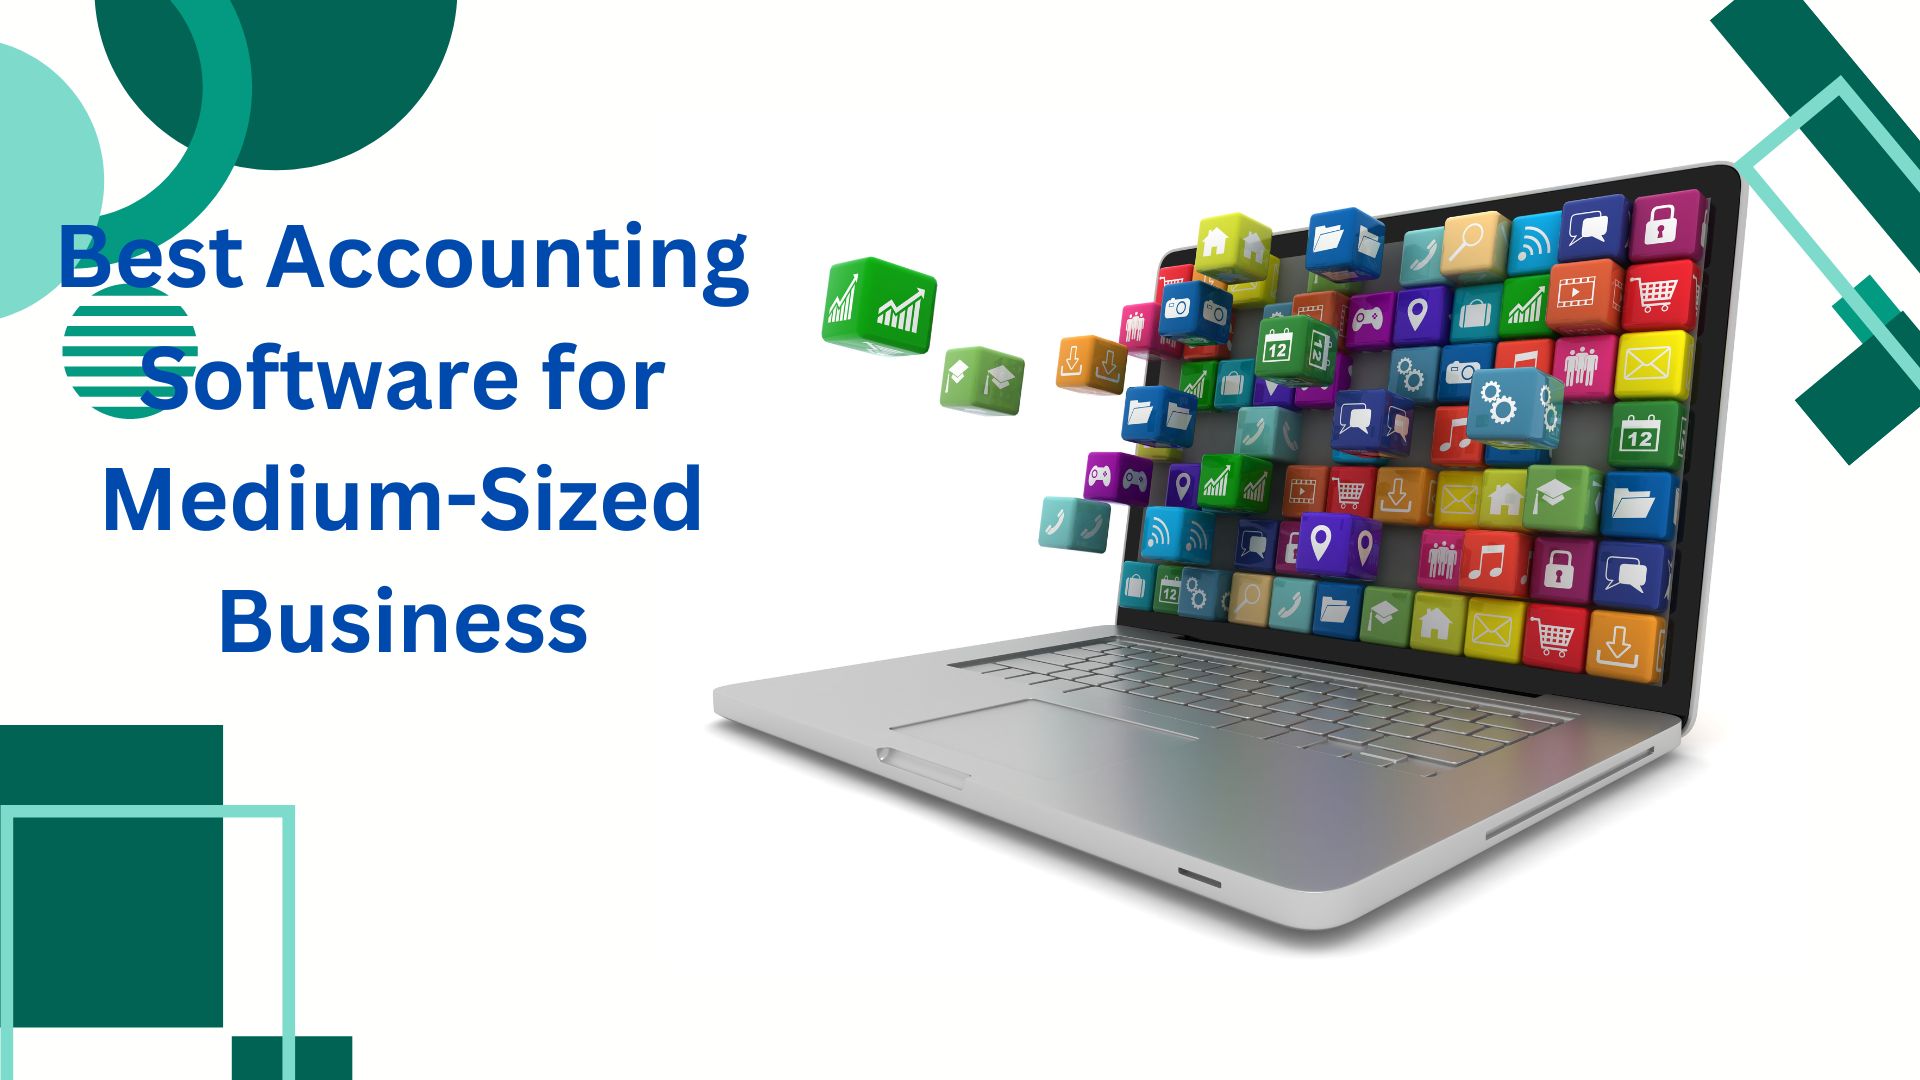 Best Accounting Software for Medium-Sized Business